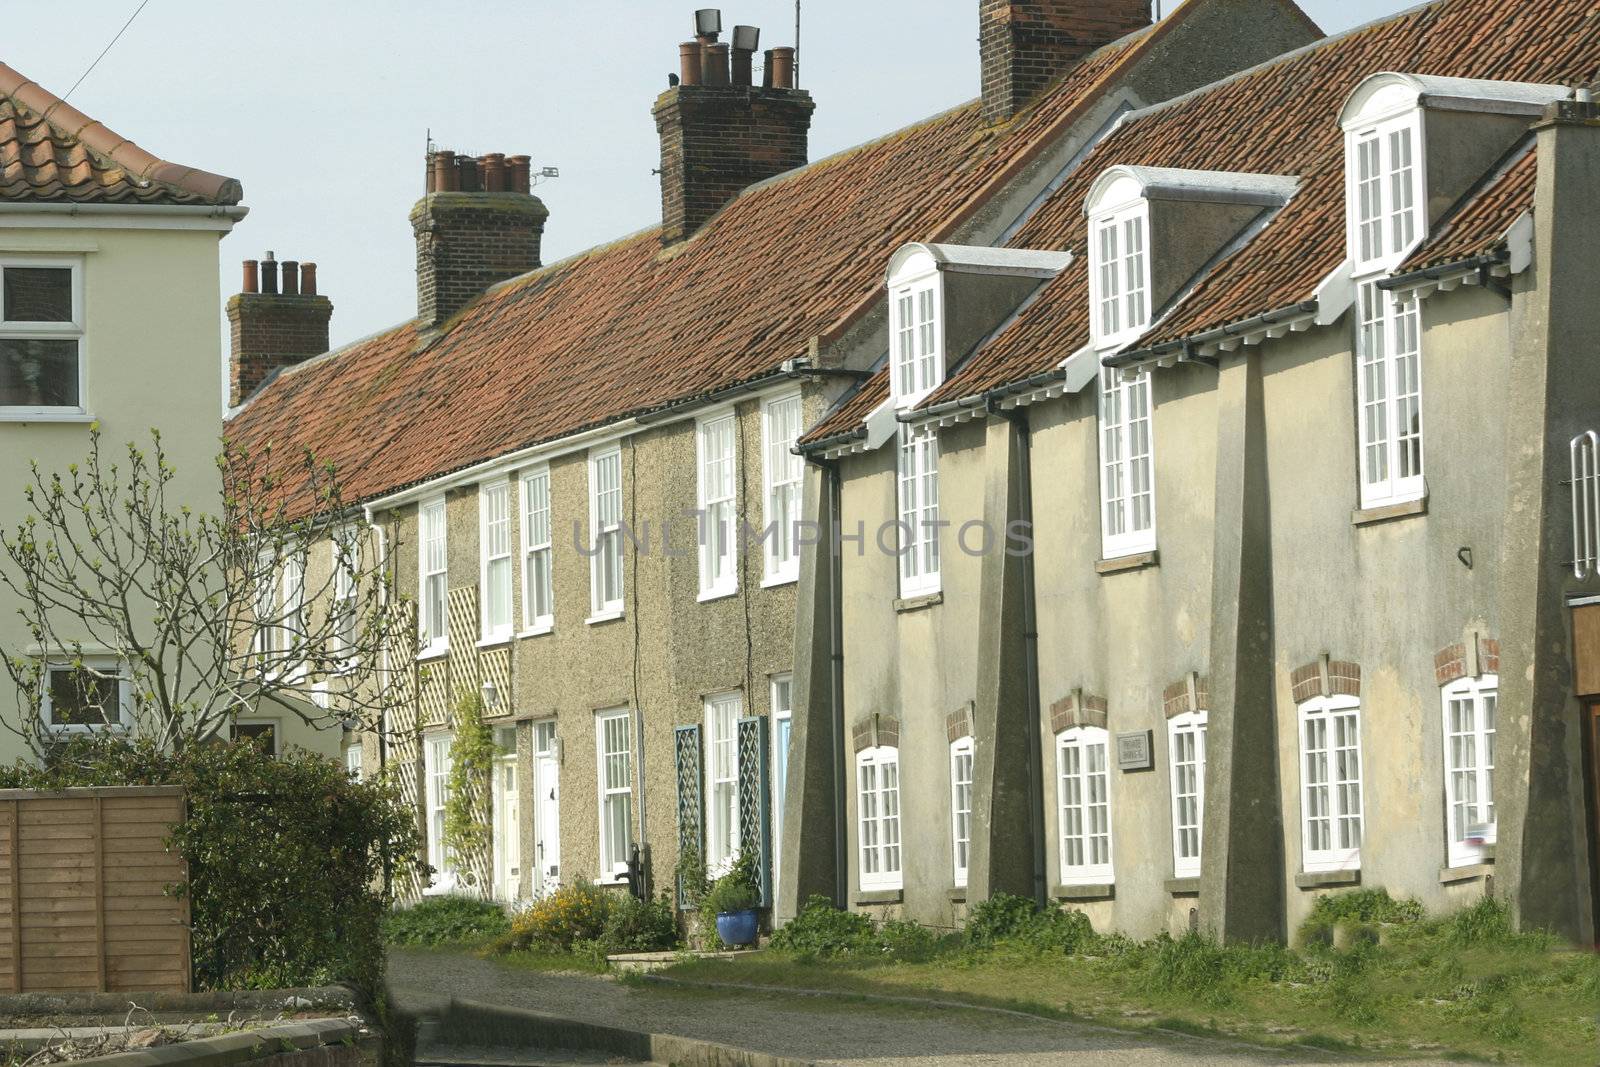 row of old cottages in a village